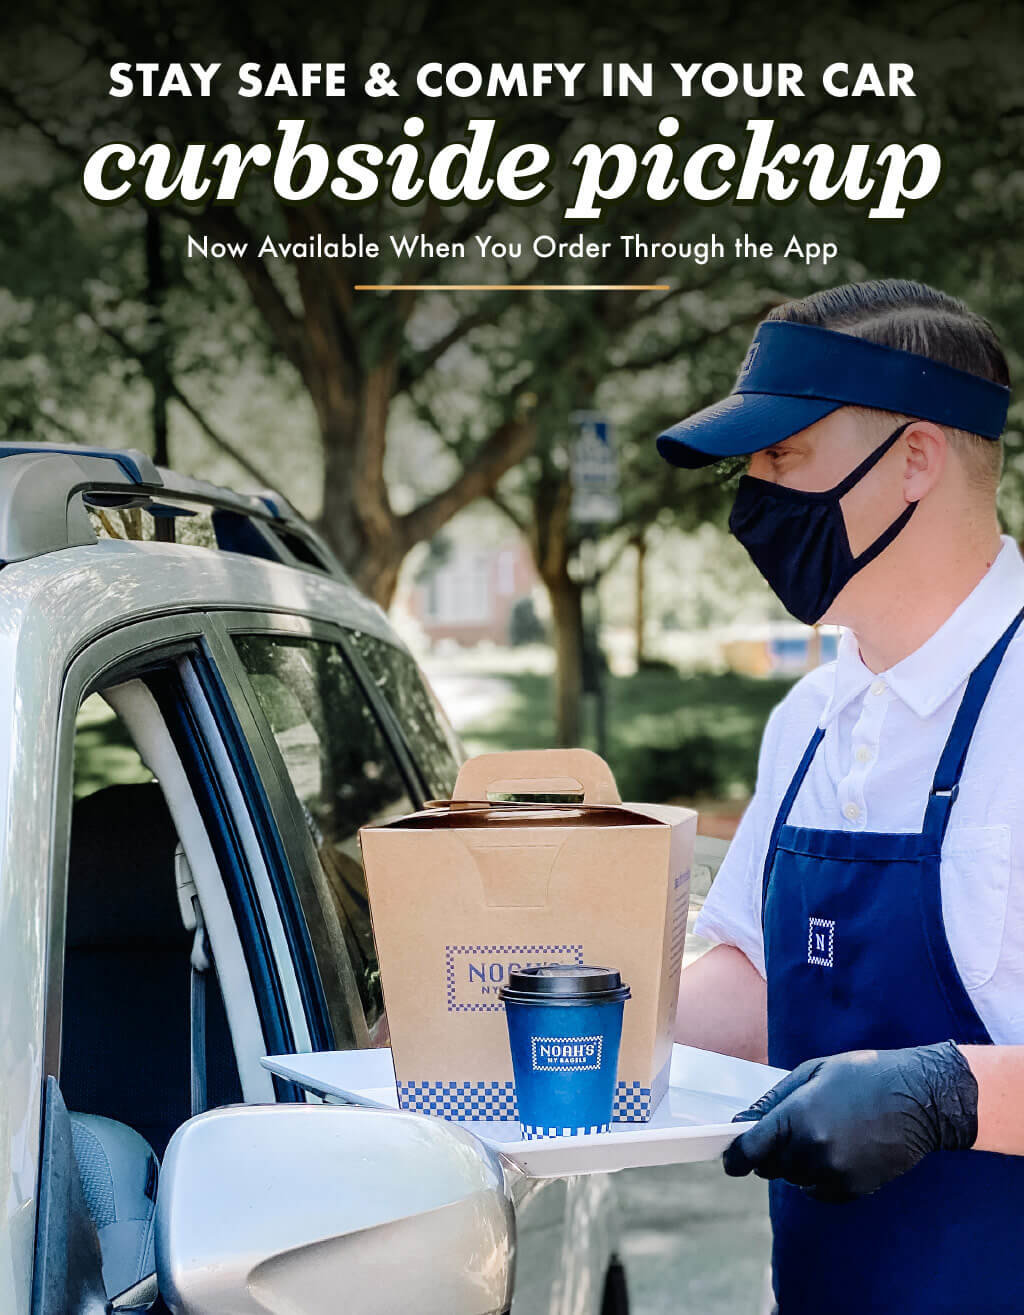 Stay comfy in your car with Curbside Pickup when you order through the app. Click to view app.